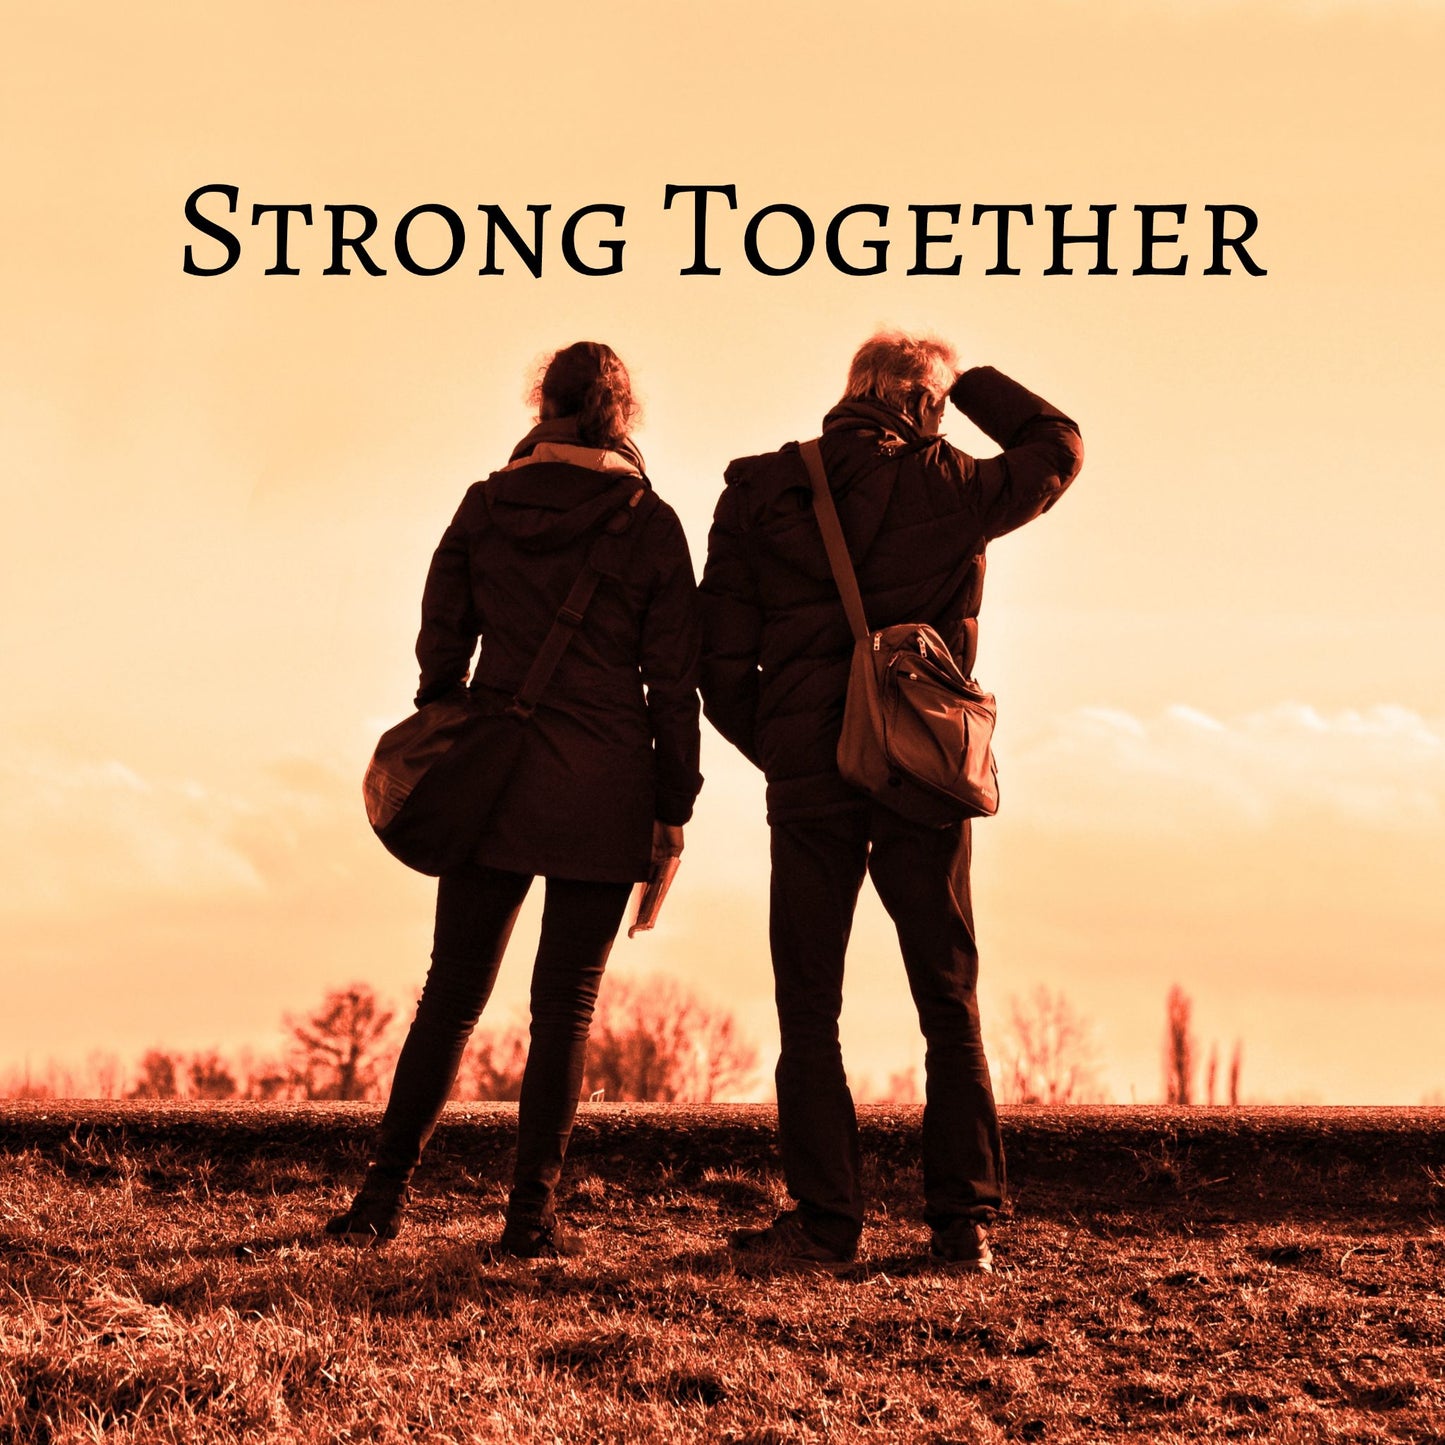 CD Cover of song Strong Together